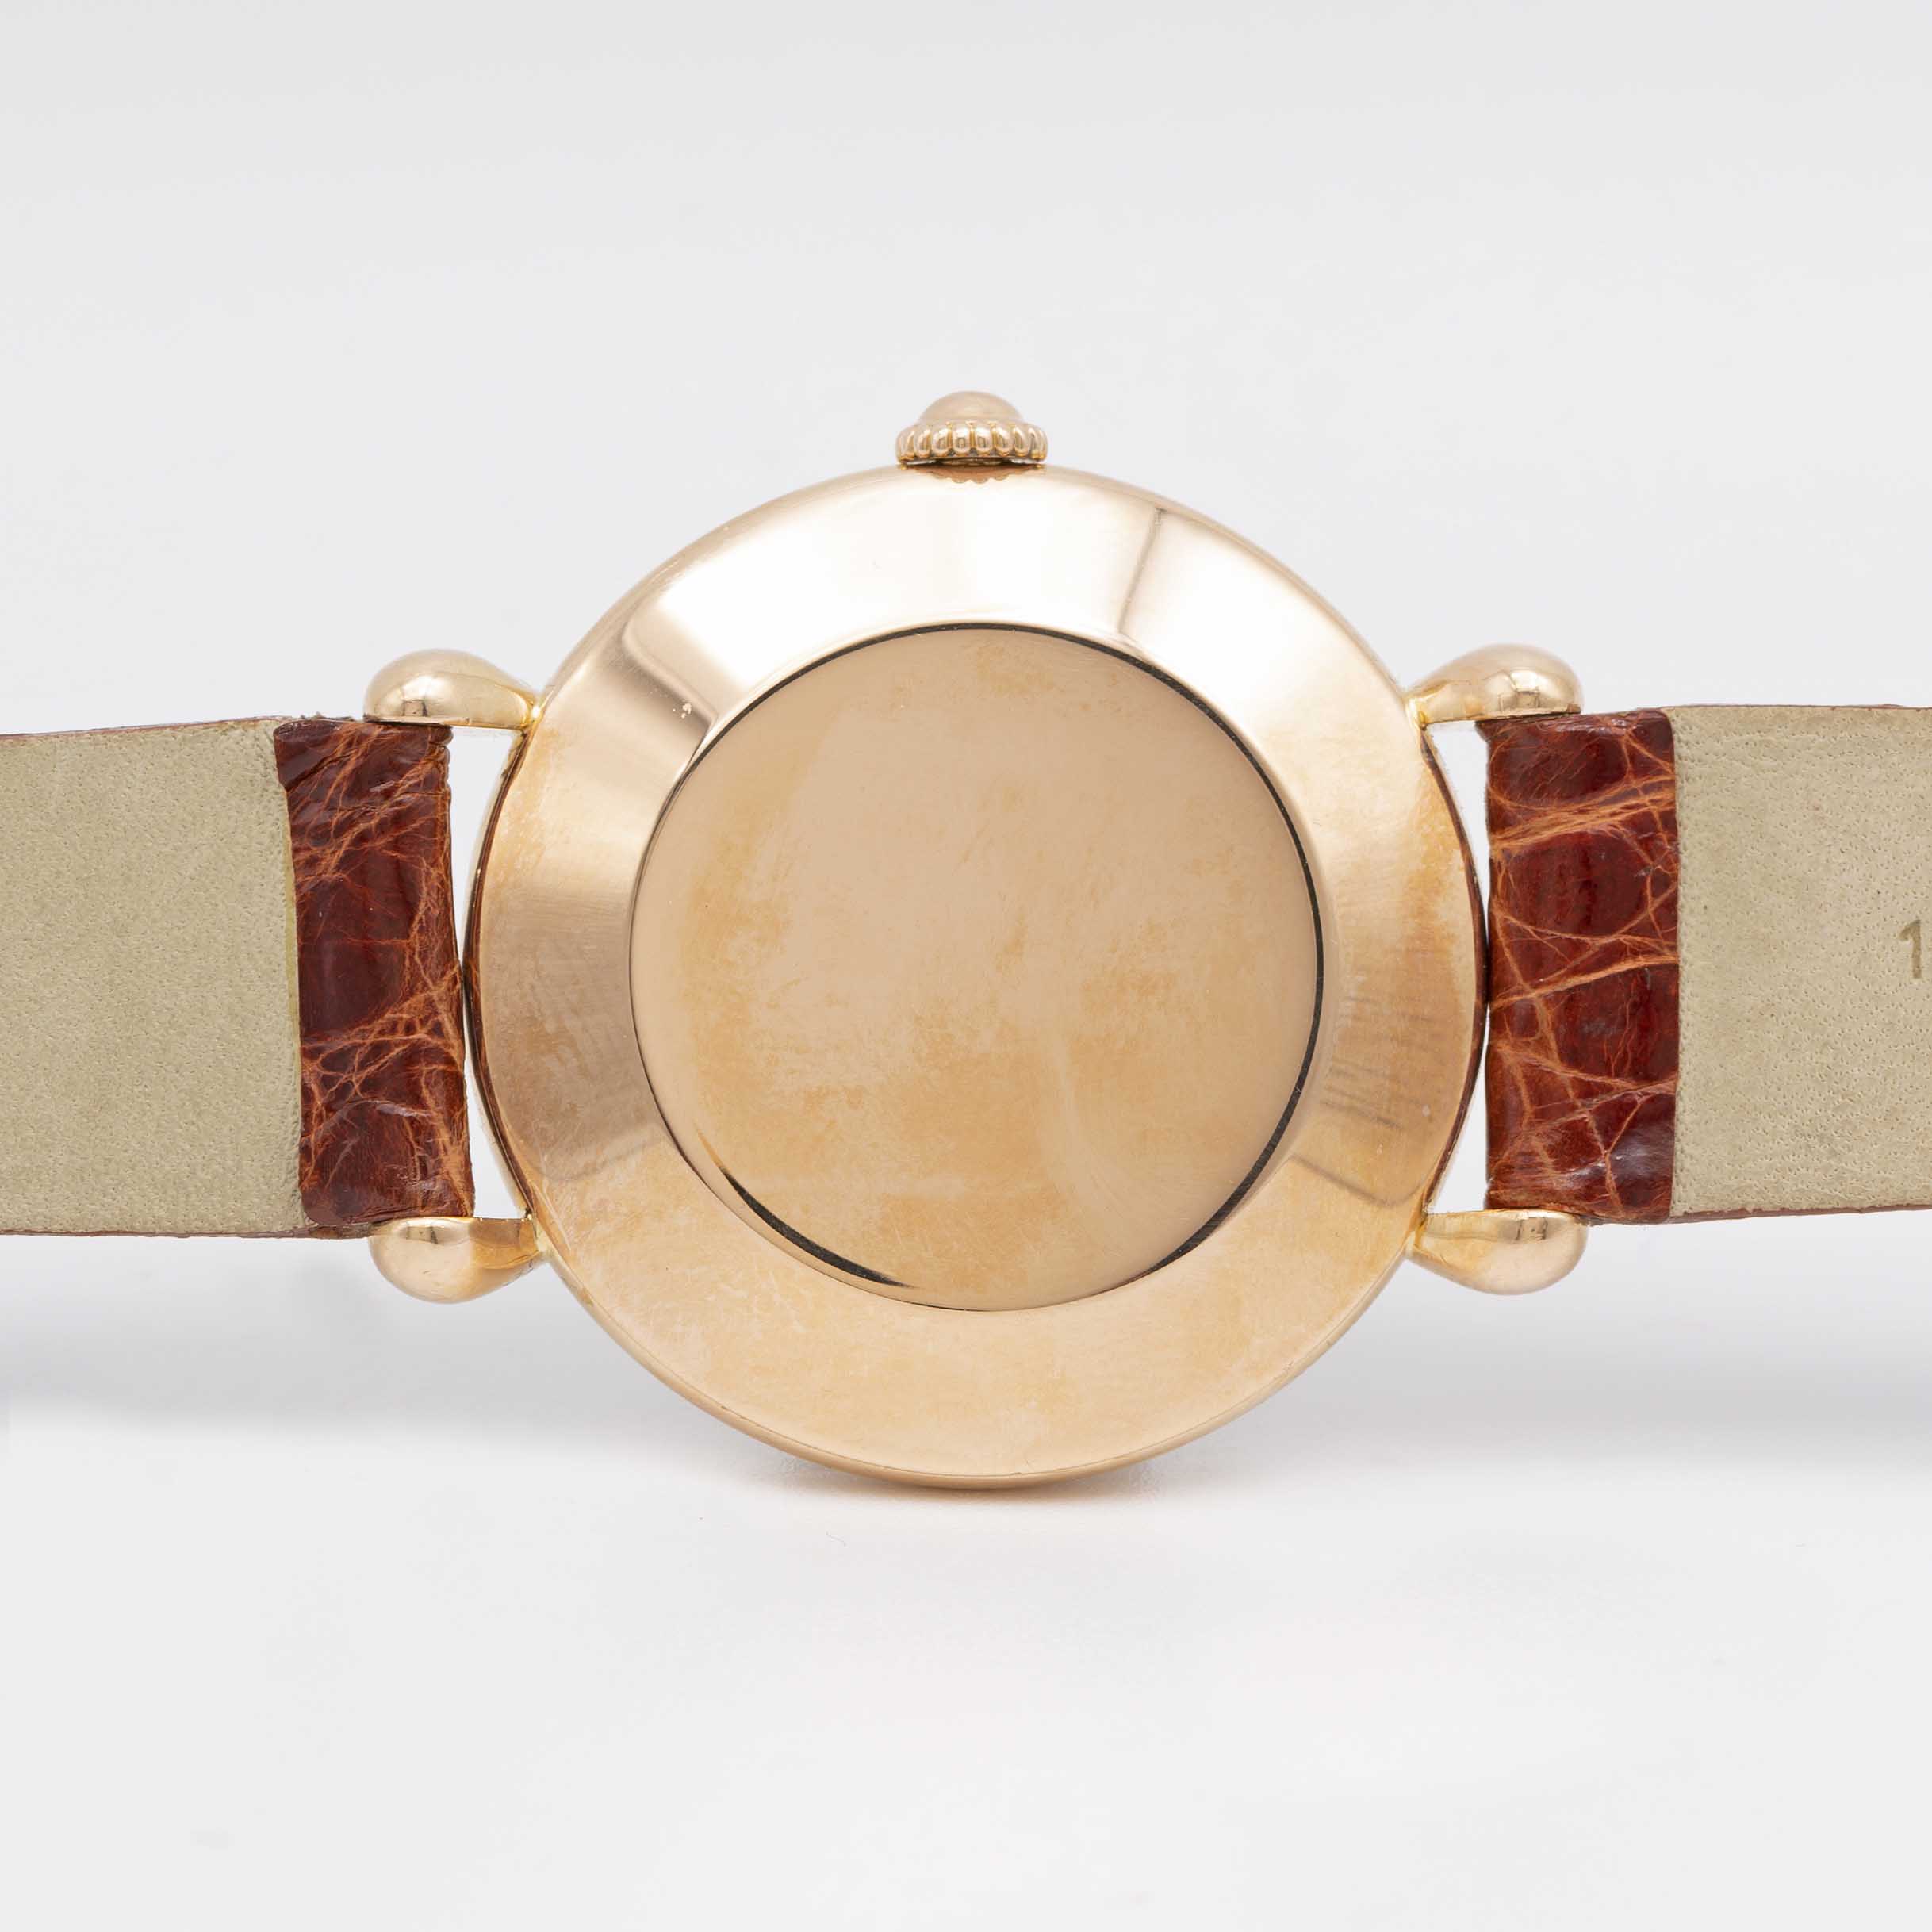 A GENTLEMAN'S 18K SOLID ROSE GOLD VACHERON & CONSTANTIN WRIST WATCH CIRCA 1950s, WITH GUILLOCHE DIAL - Image 5 of 8